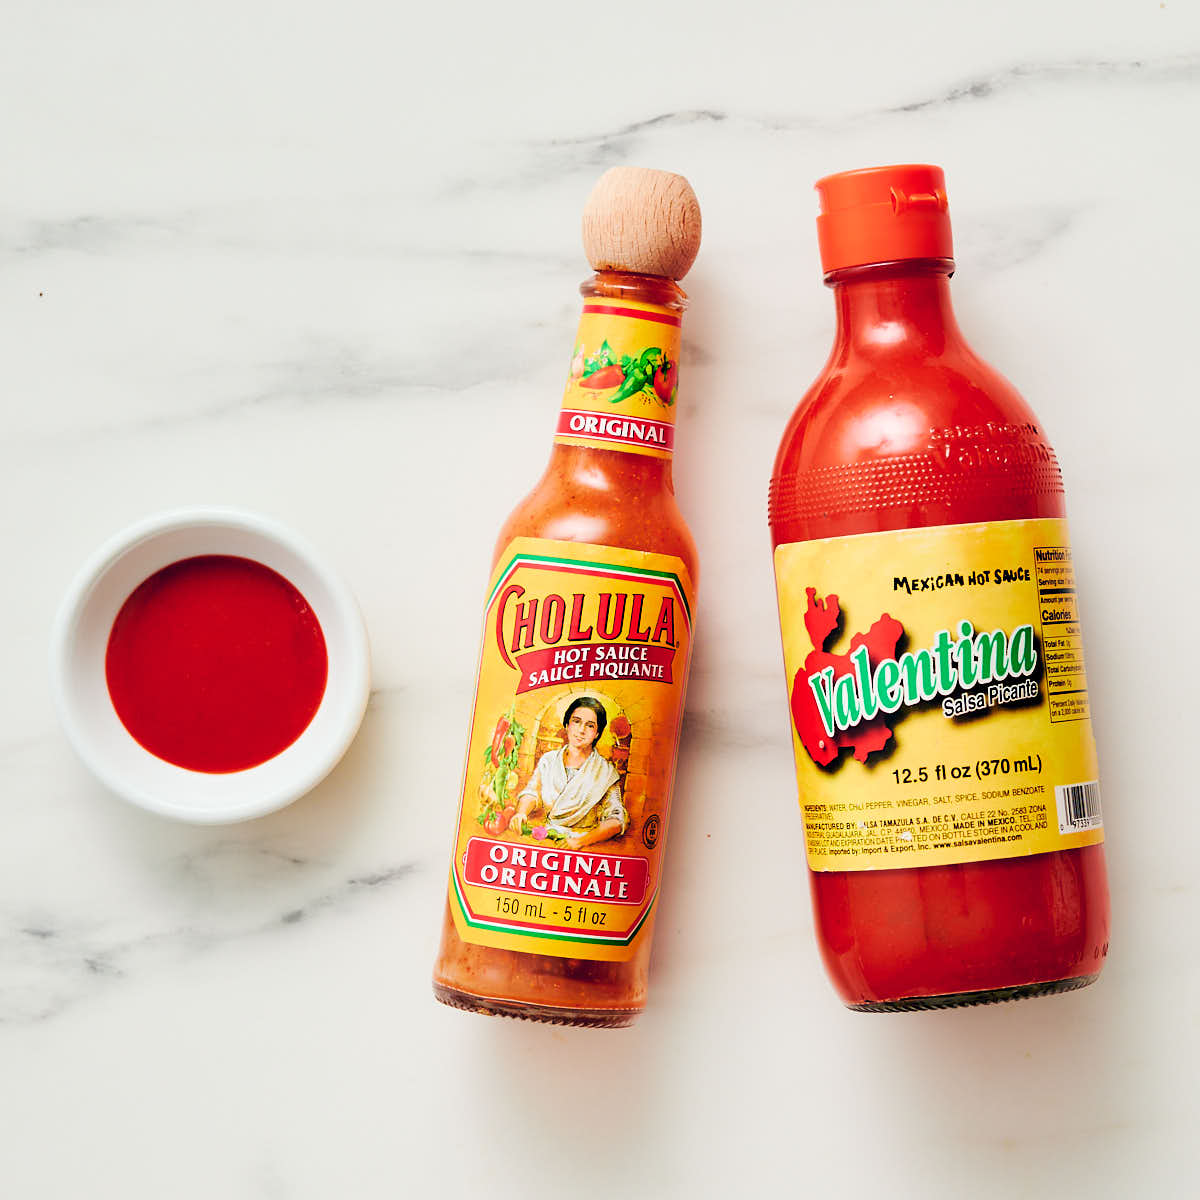 Cholula and Valentina hot sauce bottles with a small bowl of Mexican hot sauce.